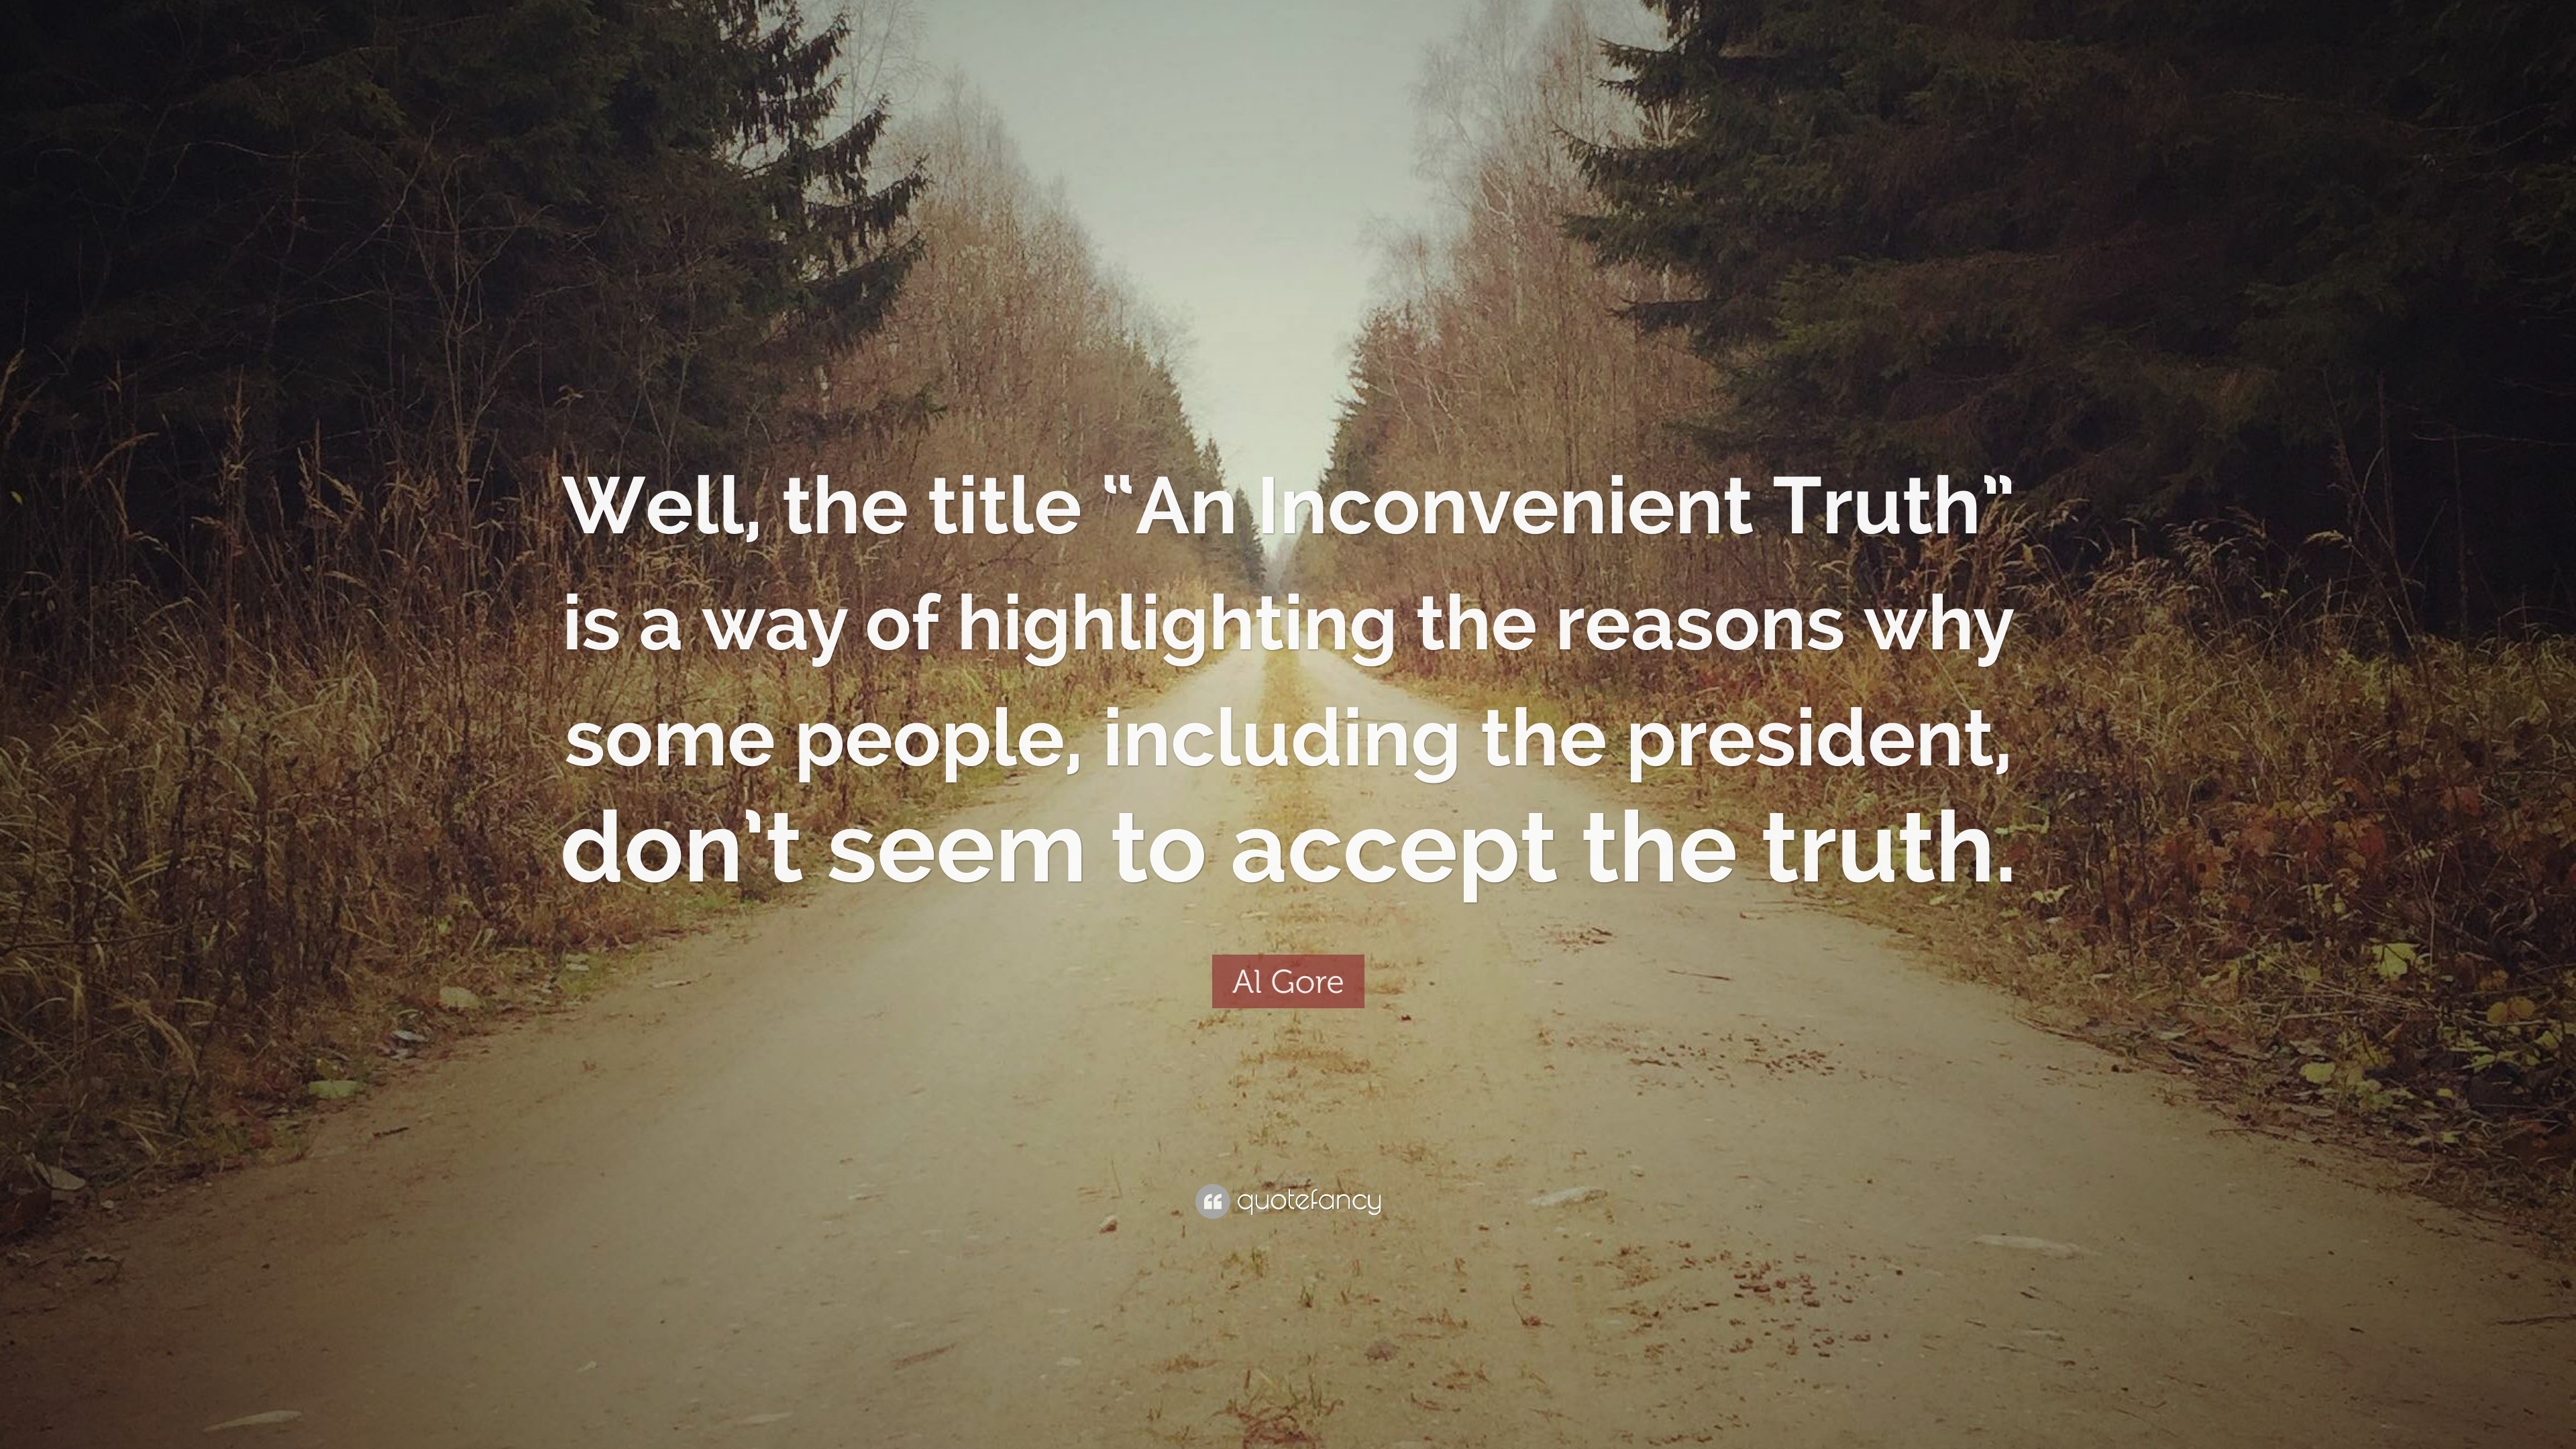 Al Gore Quote: "Well, the title "An Inconvenient Truth" is ...